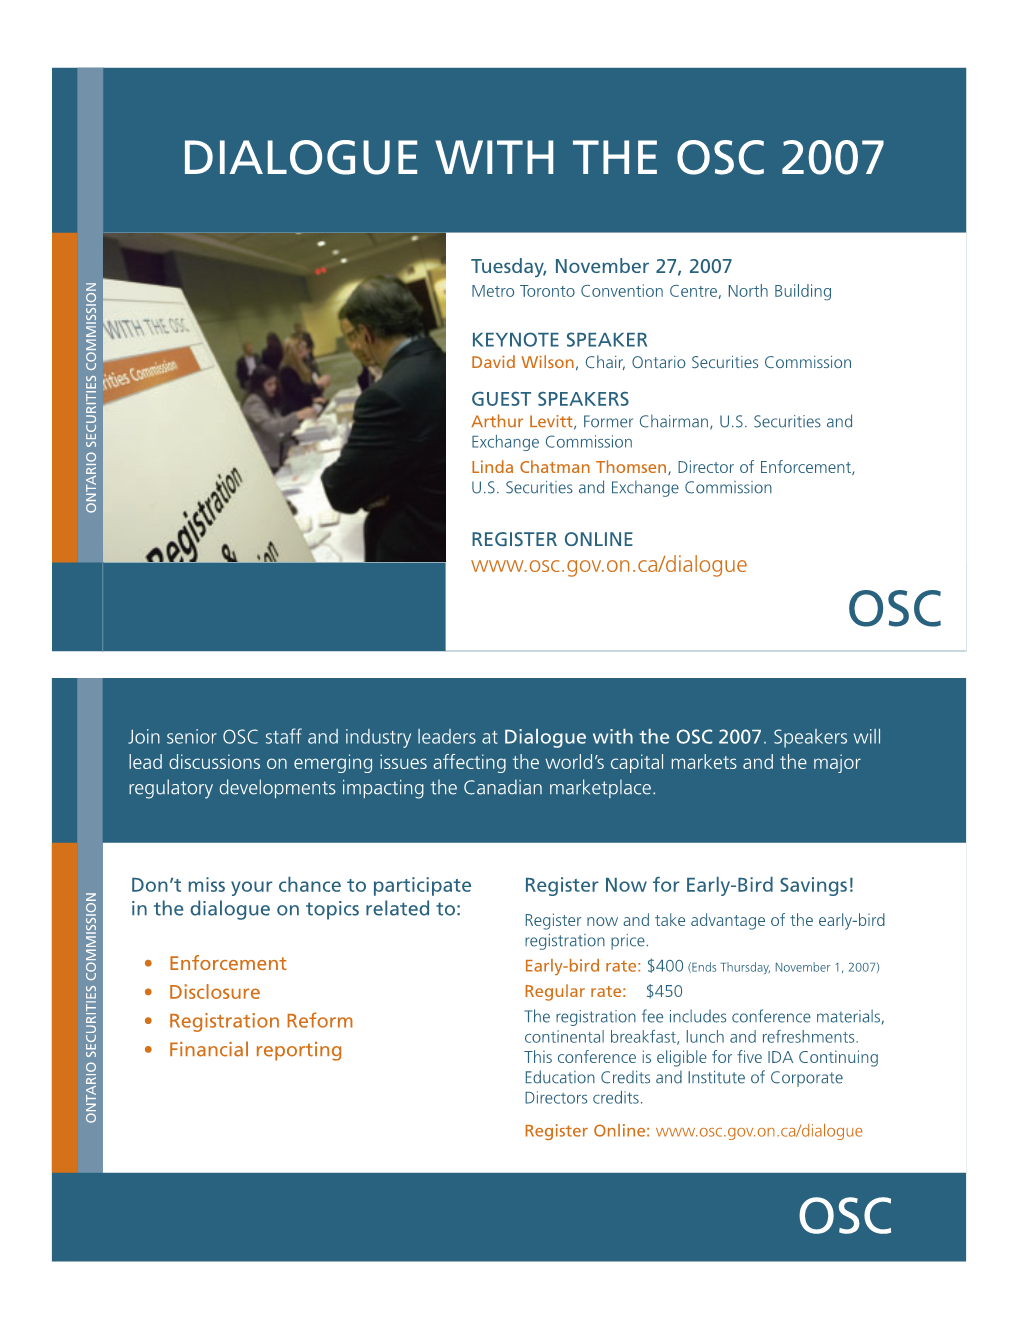 Dialogue with the Osc 2007